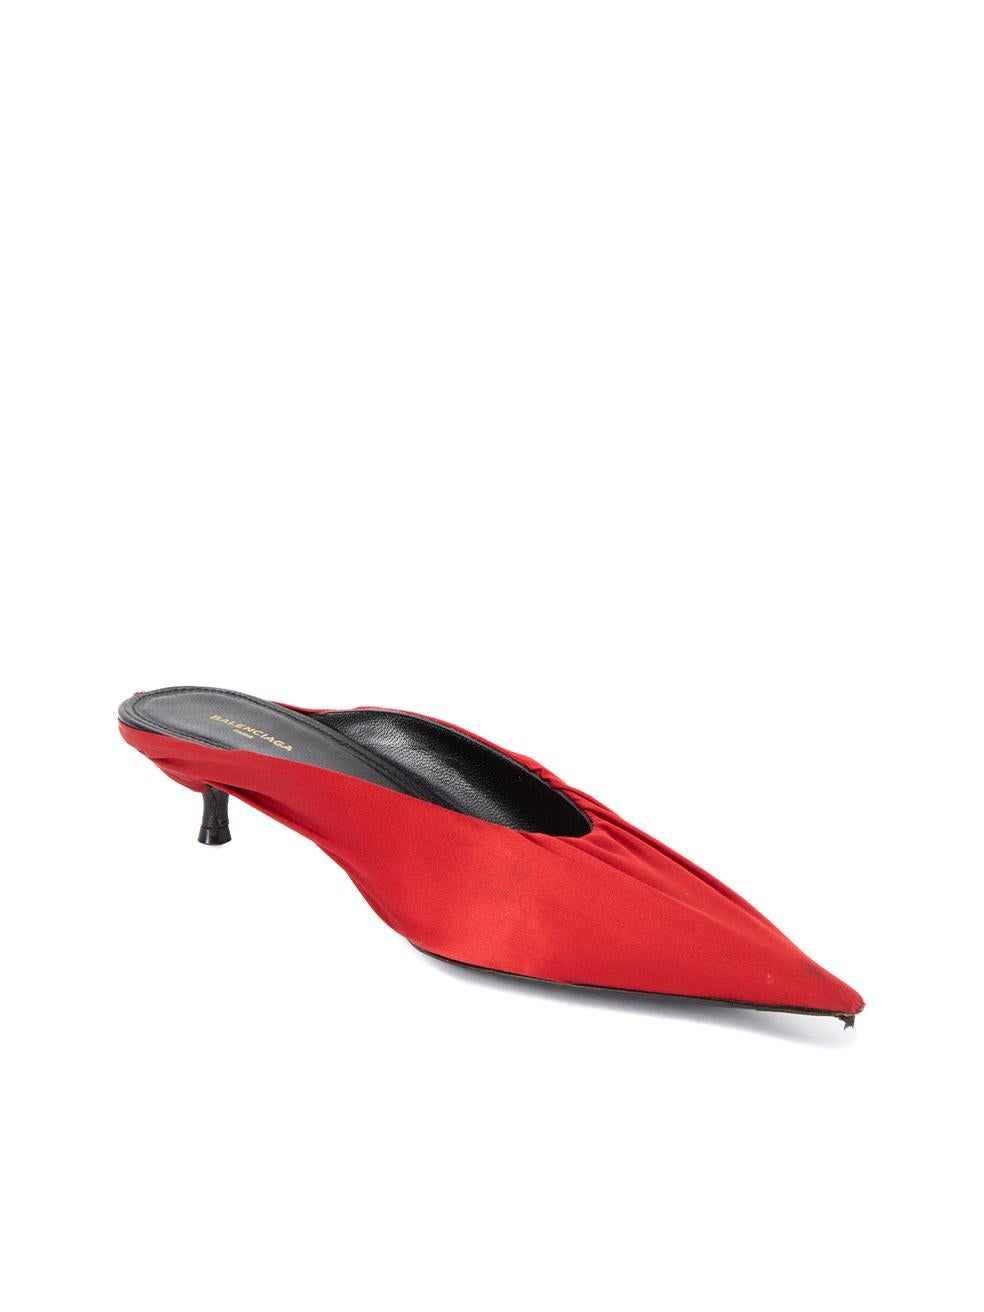 CONDITION is Very good. Minimal wear to mules is evident. Minimal wear to exterior satin material on the heel tip where peeling and stain can be seen on this used Balenciaga designer resale item. Details Red Satin Mules Slip on Pointed toe Kitten